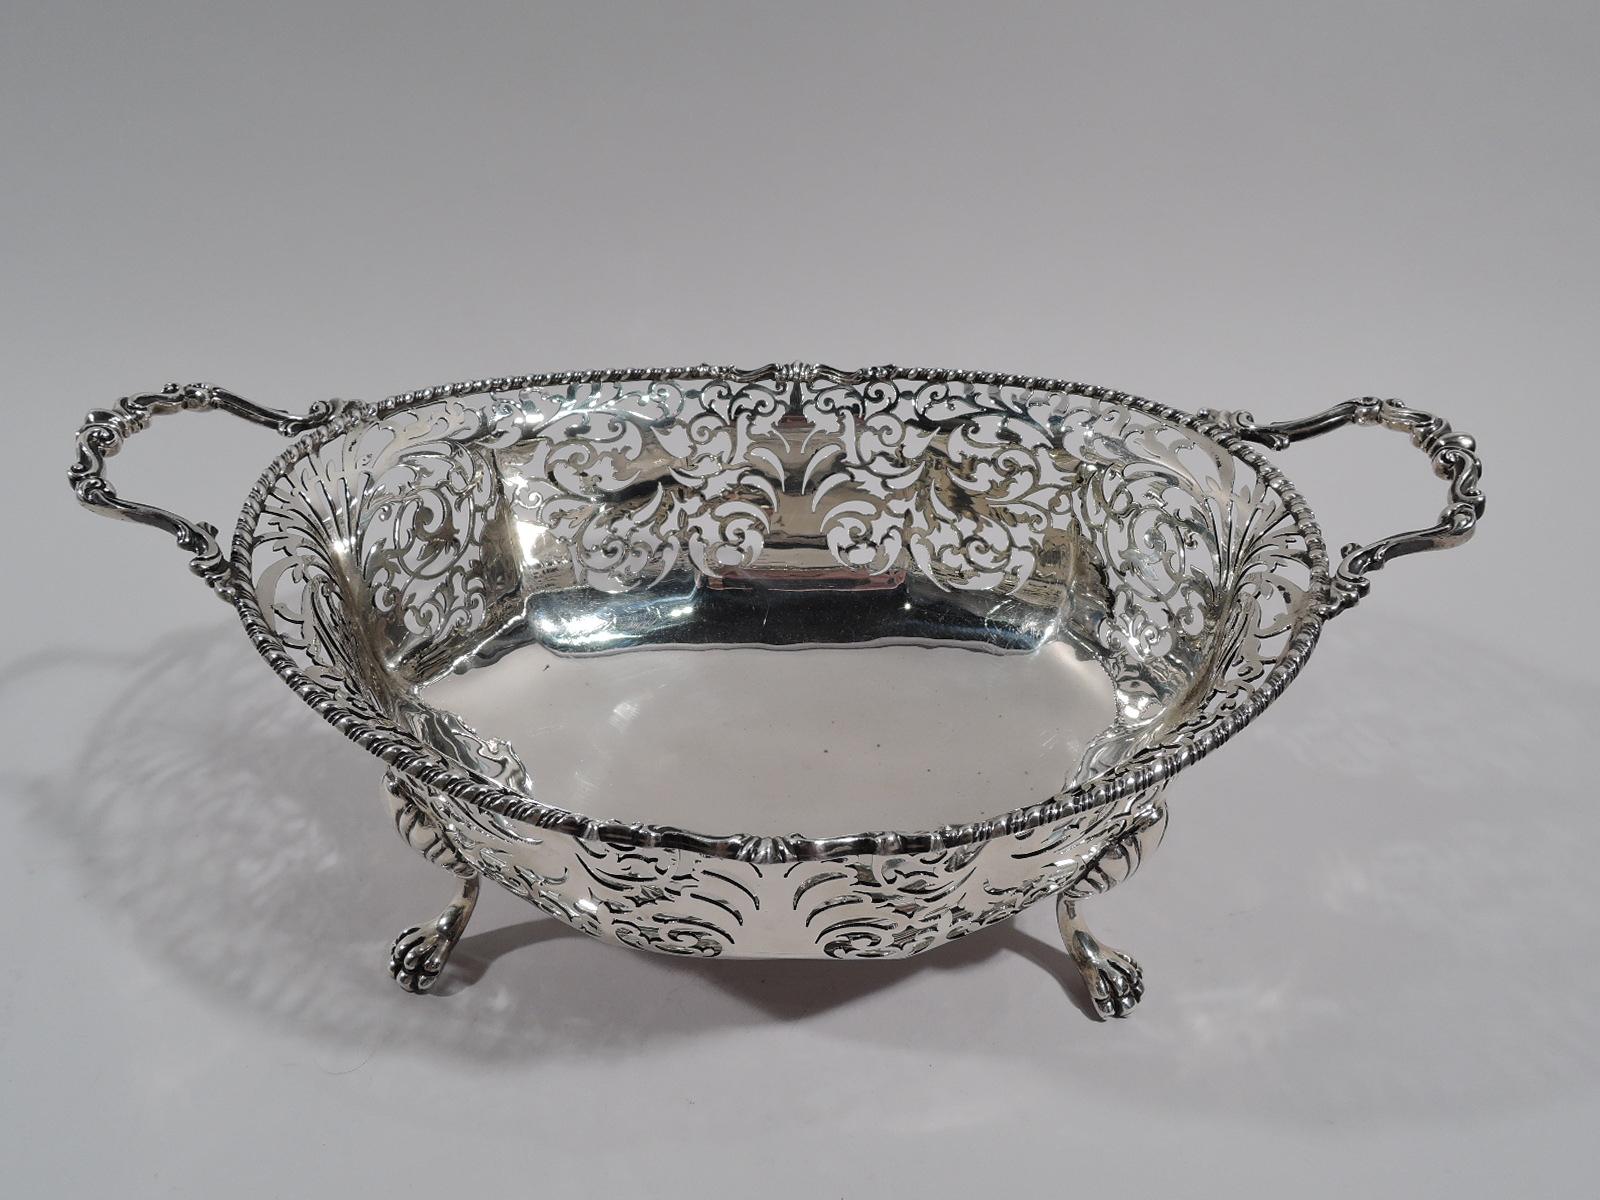 George V sterling silver basket bowl. Made by Mappin & Webb in London in 1919. Oval with solid and faceted well. Sides have pierced ornament: Fluid and symmetrical scrolls and foliage. Cabled rim with scrolled bracket handles. Four paw supports with